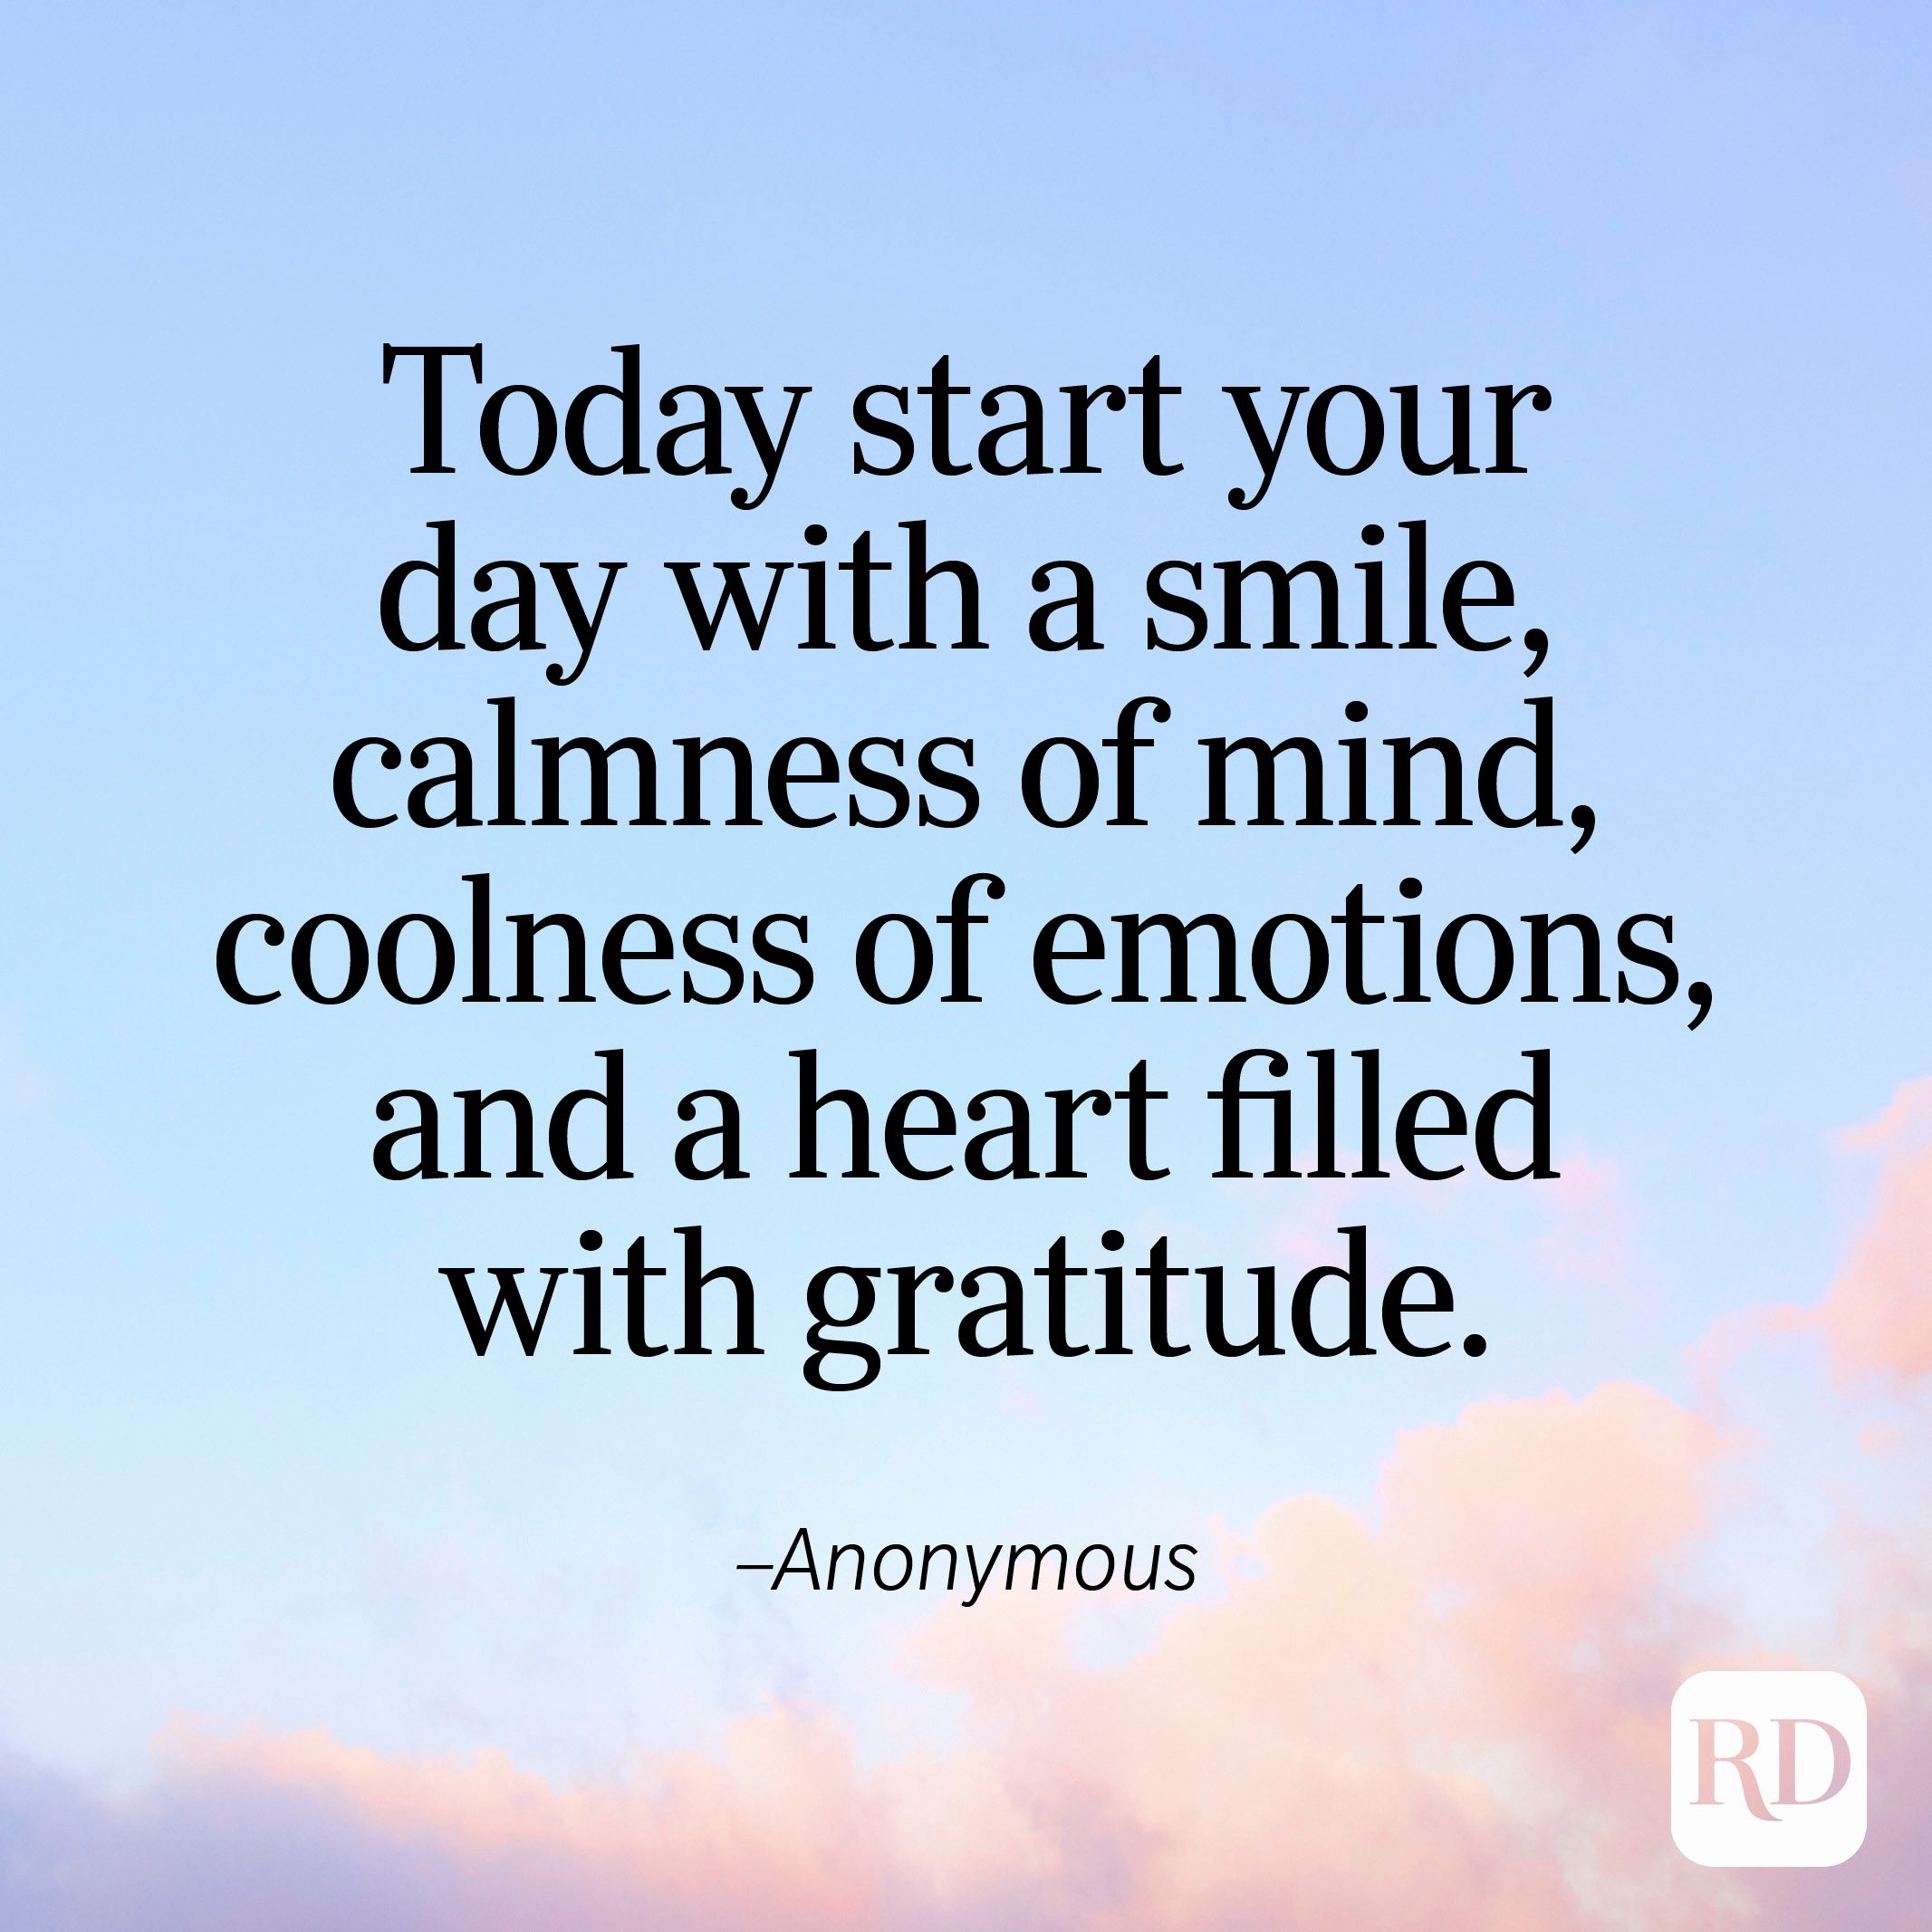 "Today start your day with a smile, calmness of mind, coolness of emotions, and a heart filled with gratitude." —Anonymous